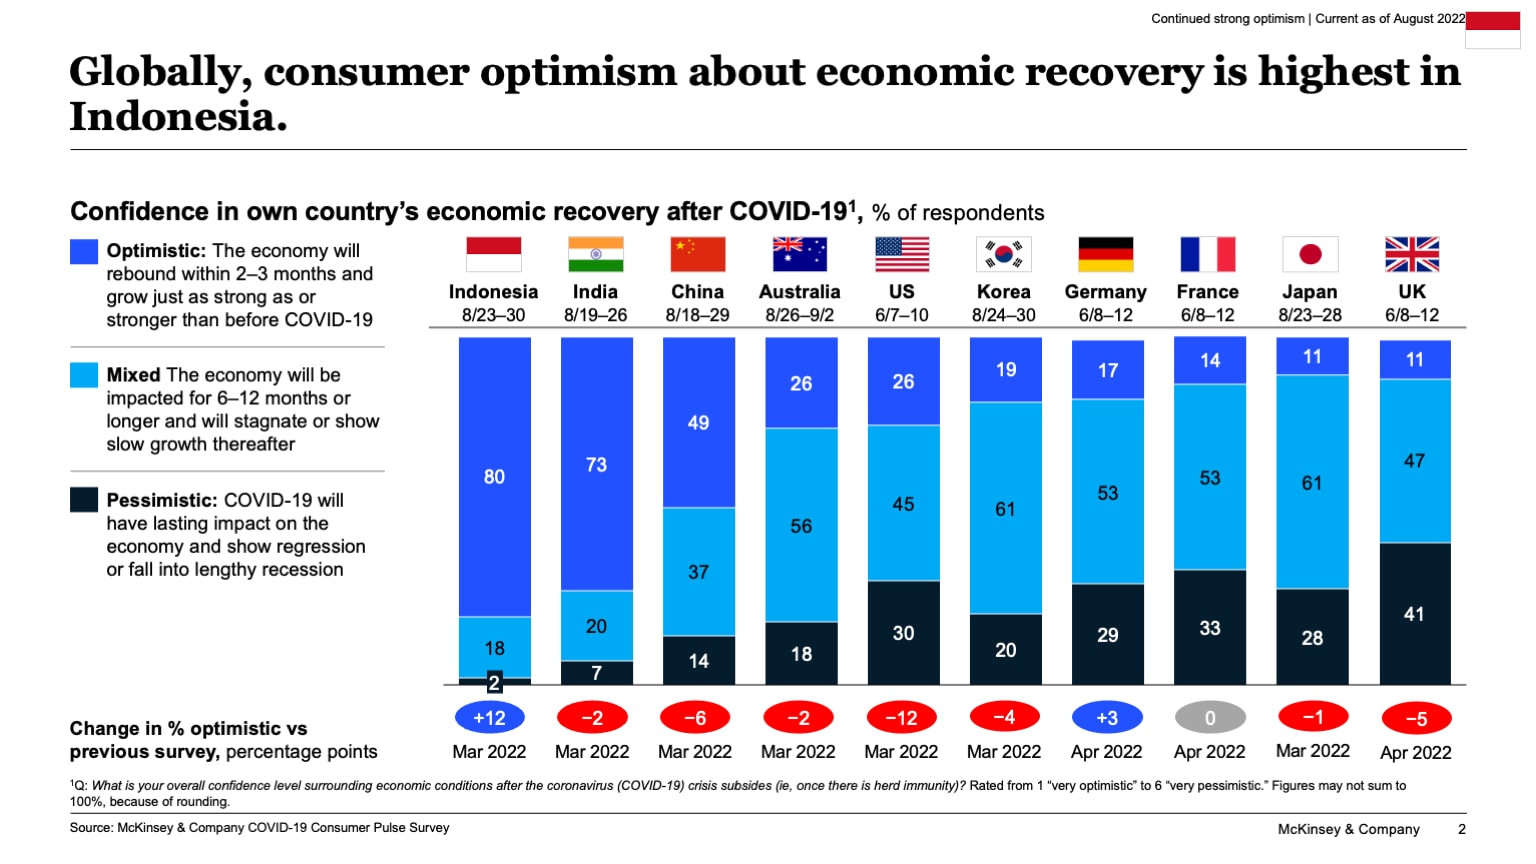 Globally, consumer optimism about economic recovery is highest in Indonesia.